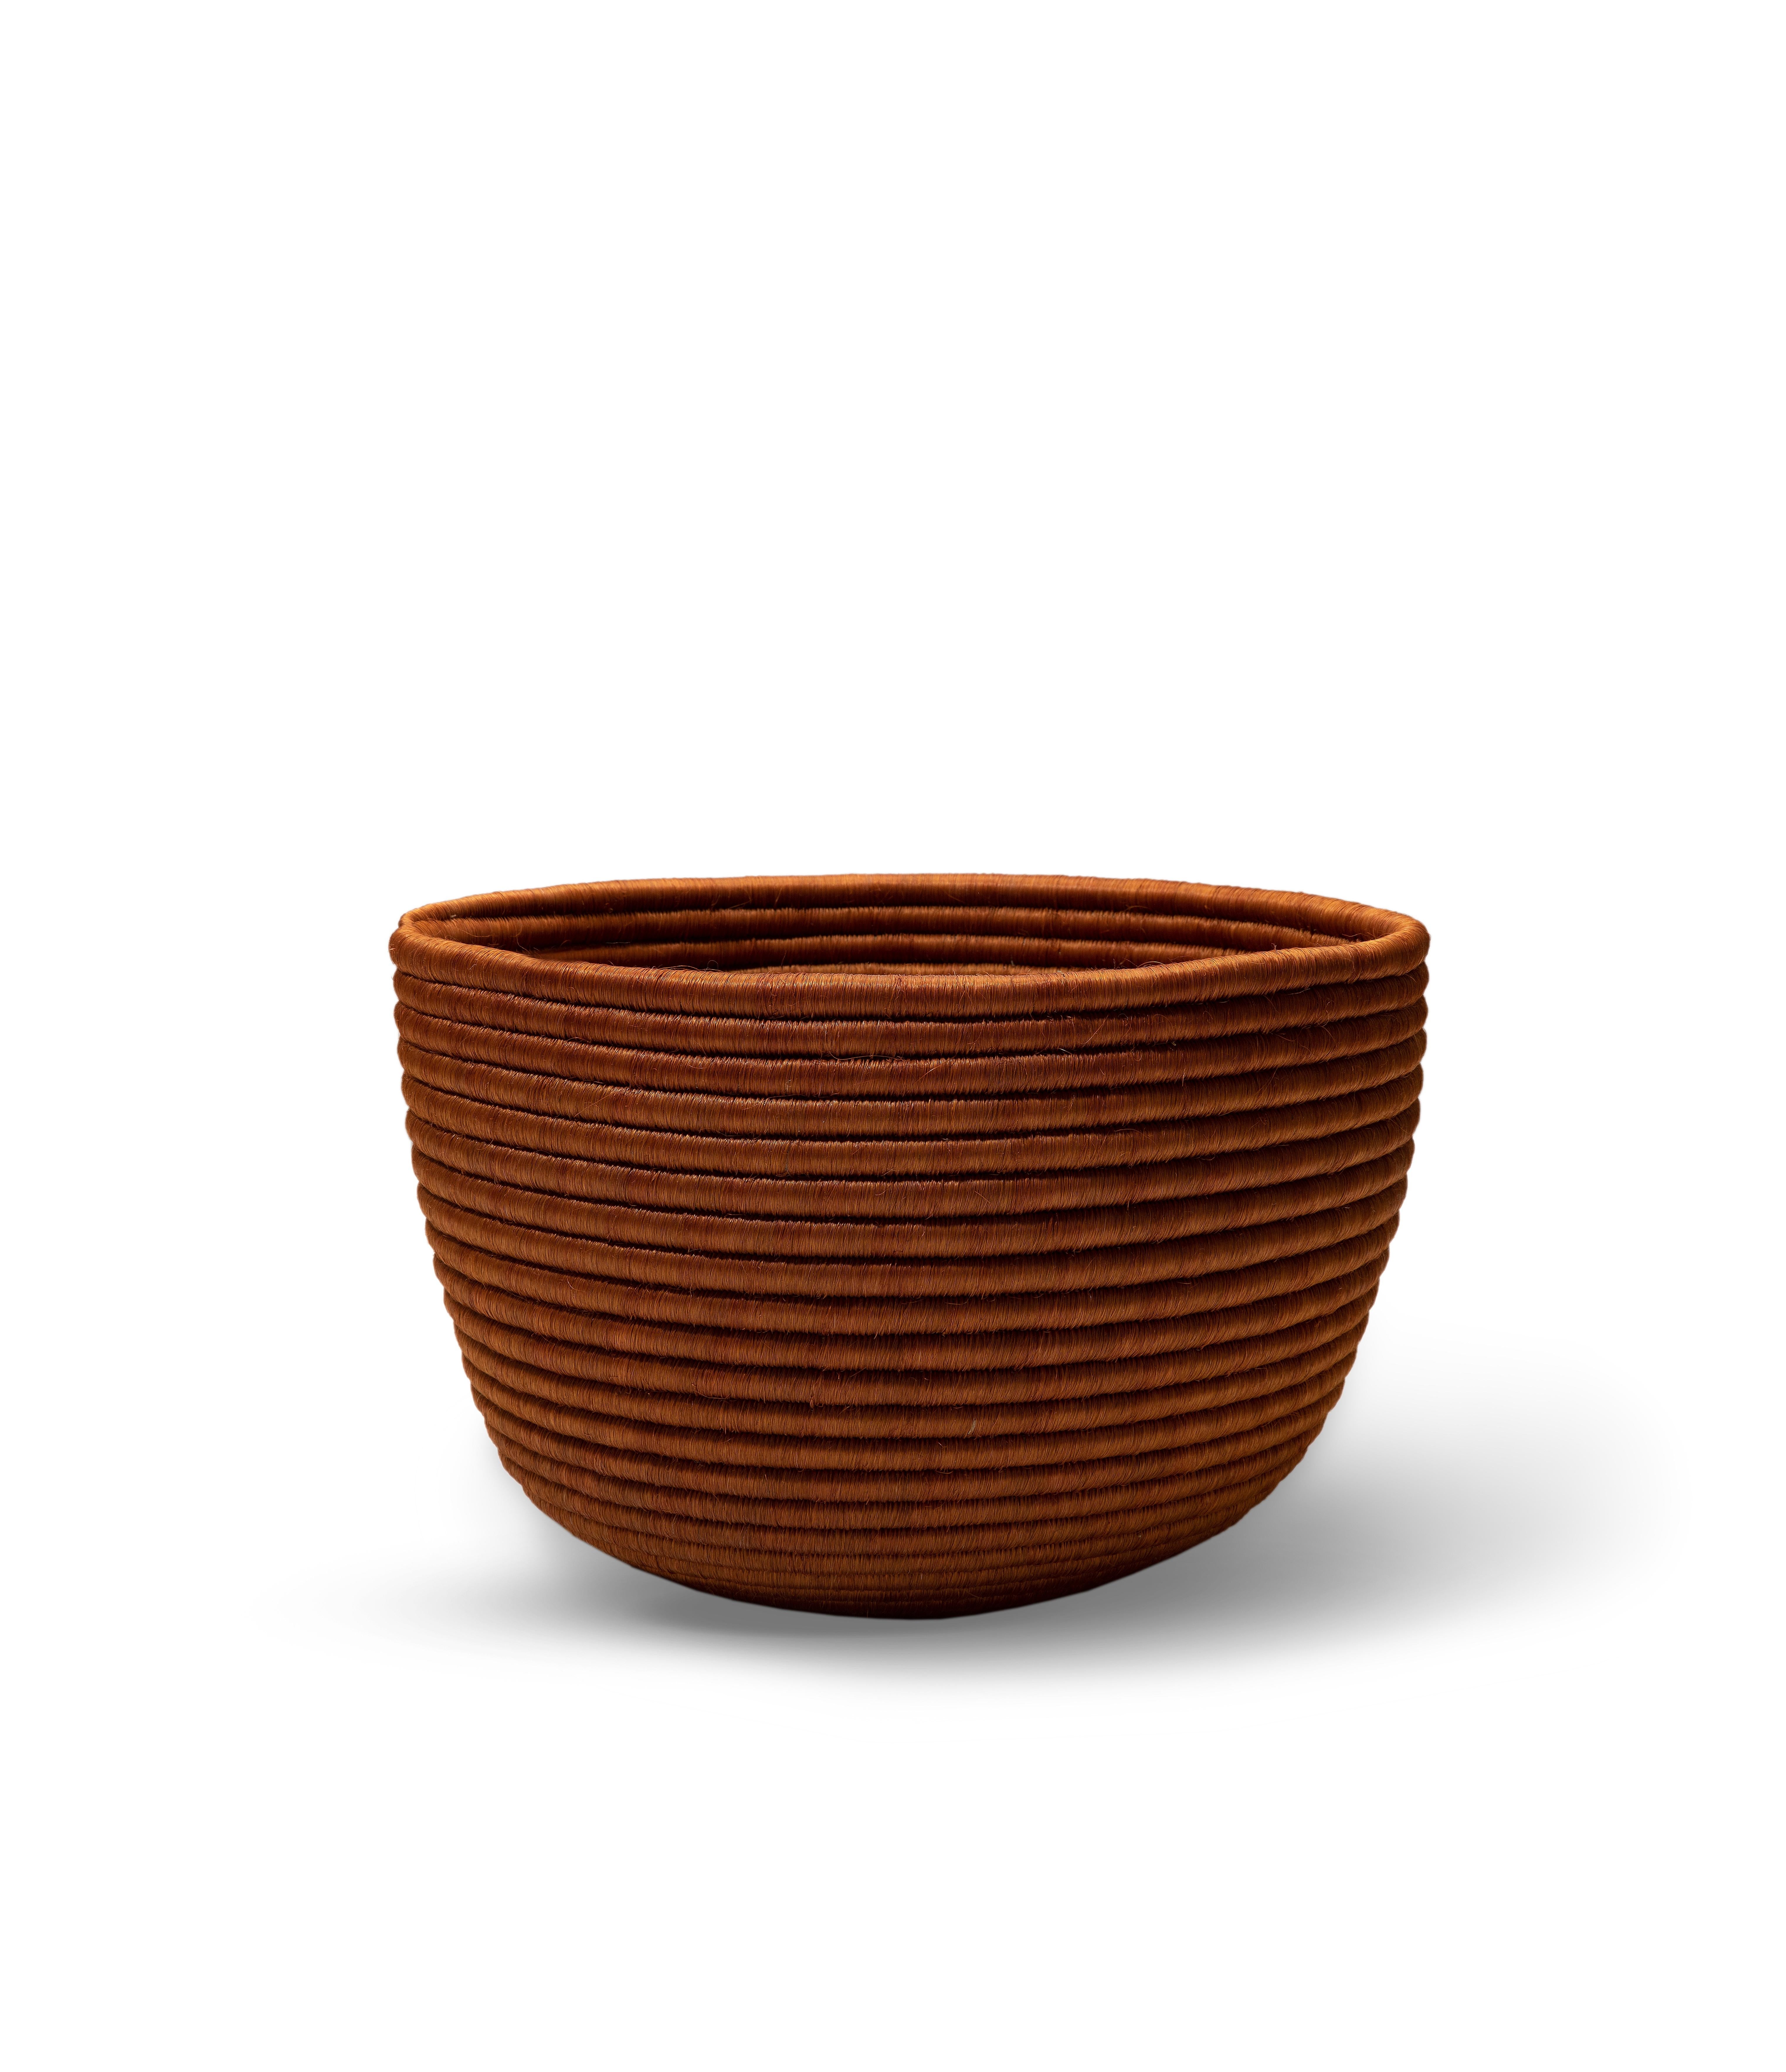 Small La Che basket by Sebastian Herkner
Materials: 100 % natural fique agave.
Technique: Hand-woven in Colombia. 
Dimensions: Diameter 43 cm x Height 22 cm 
Available in colors: cobre, olive, black, cuerda. And other sizes.

The La Che basket